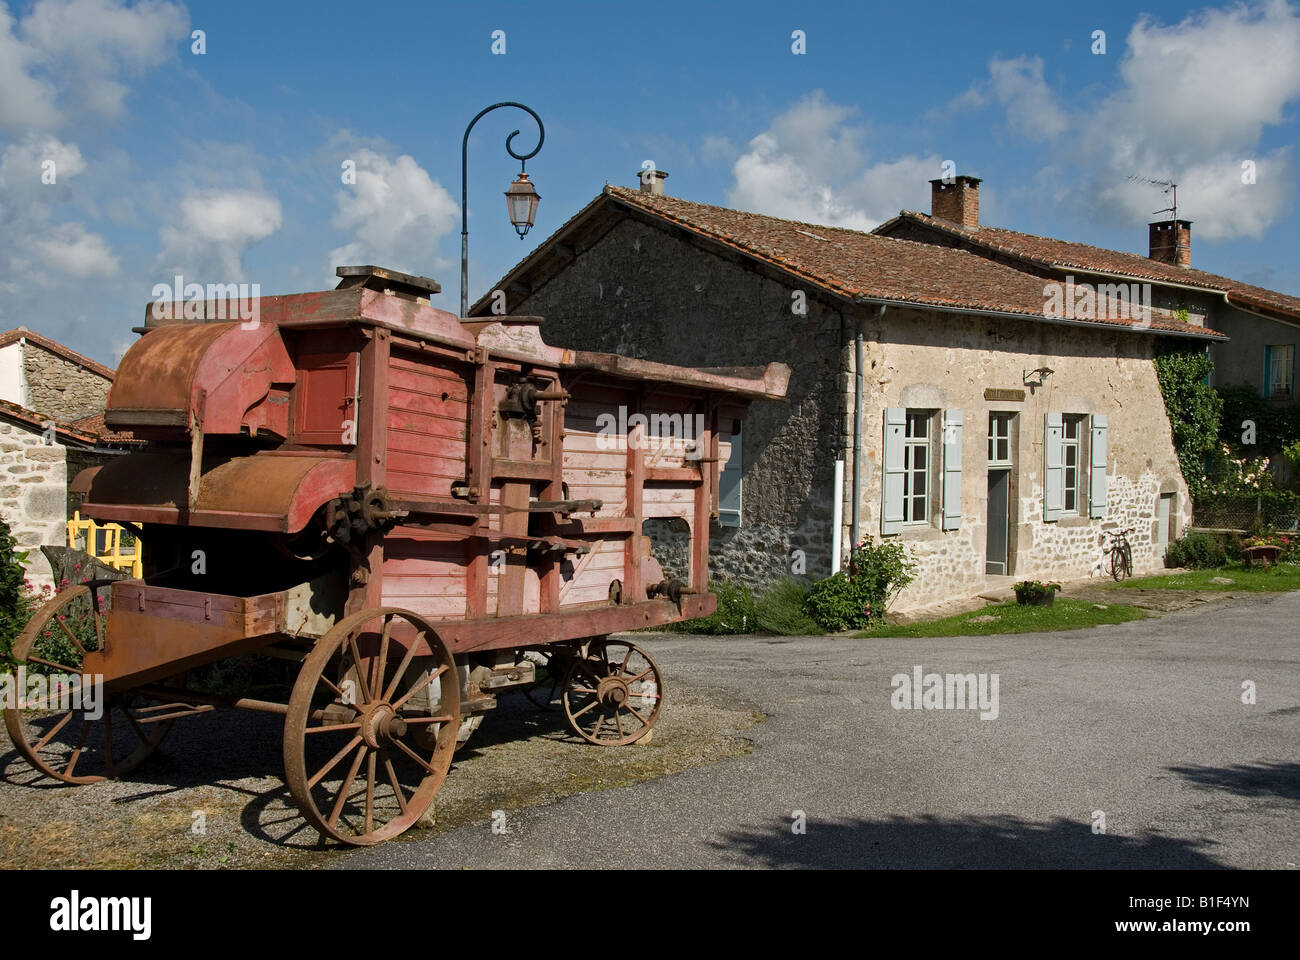 Stock photo of the old renovated schoolhouse in the village of Montrol Senard Stock Photo